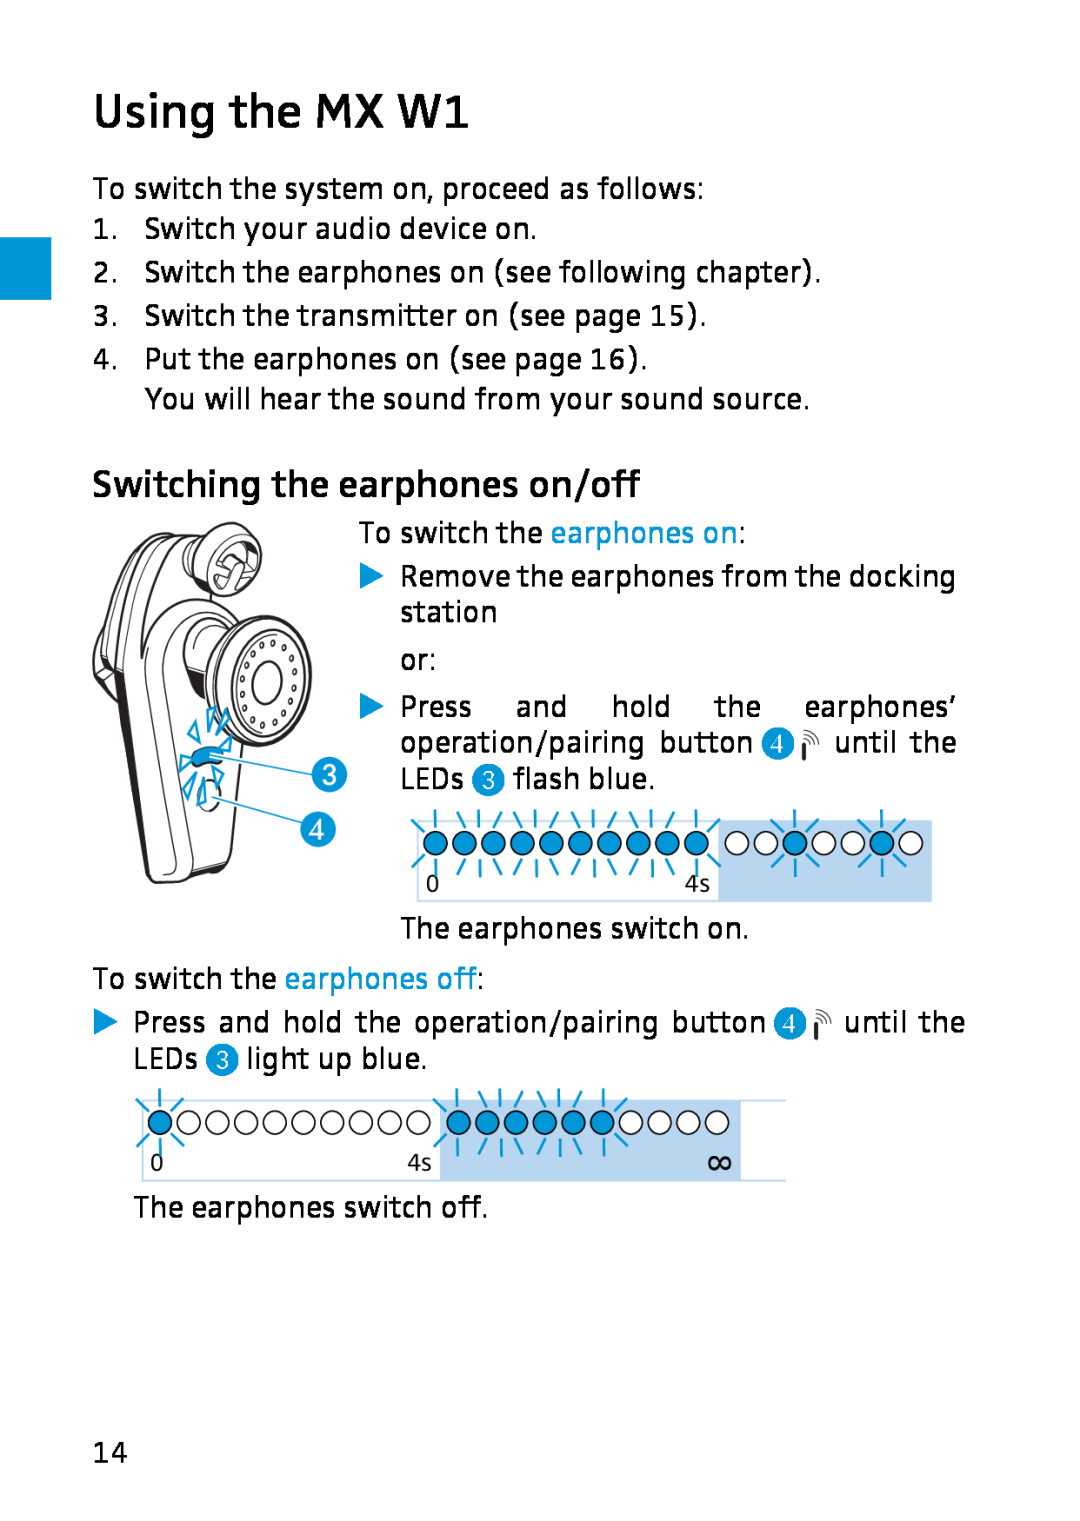 Sennheiser instruction manual Using the MX W1, Switching the earphones on/off 